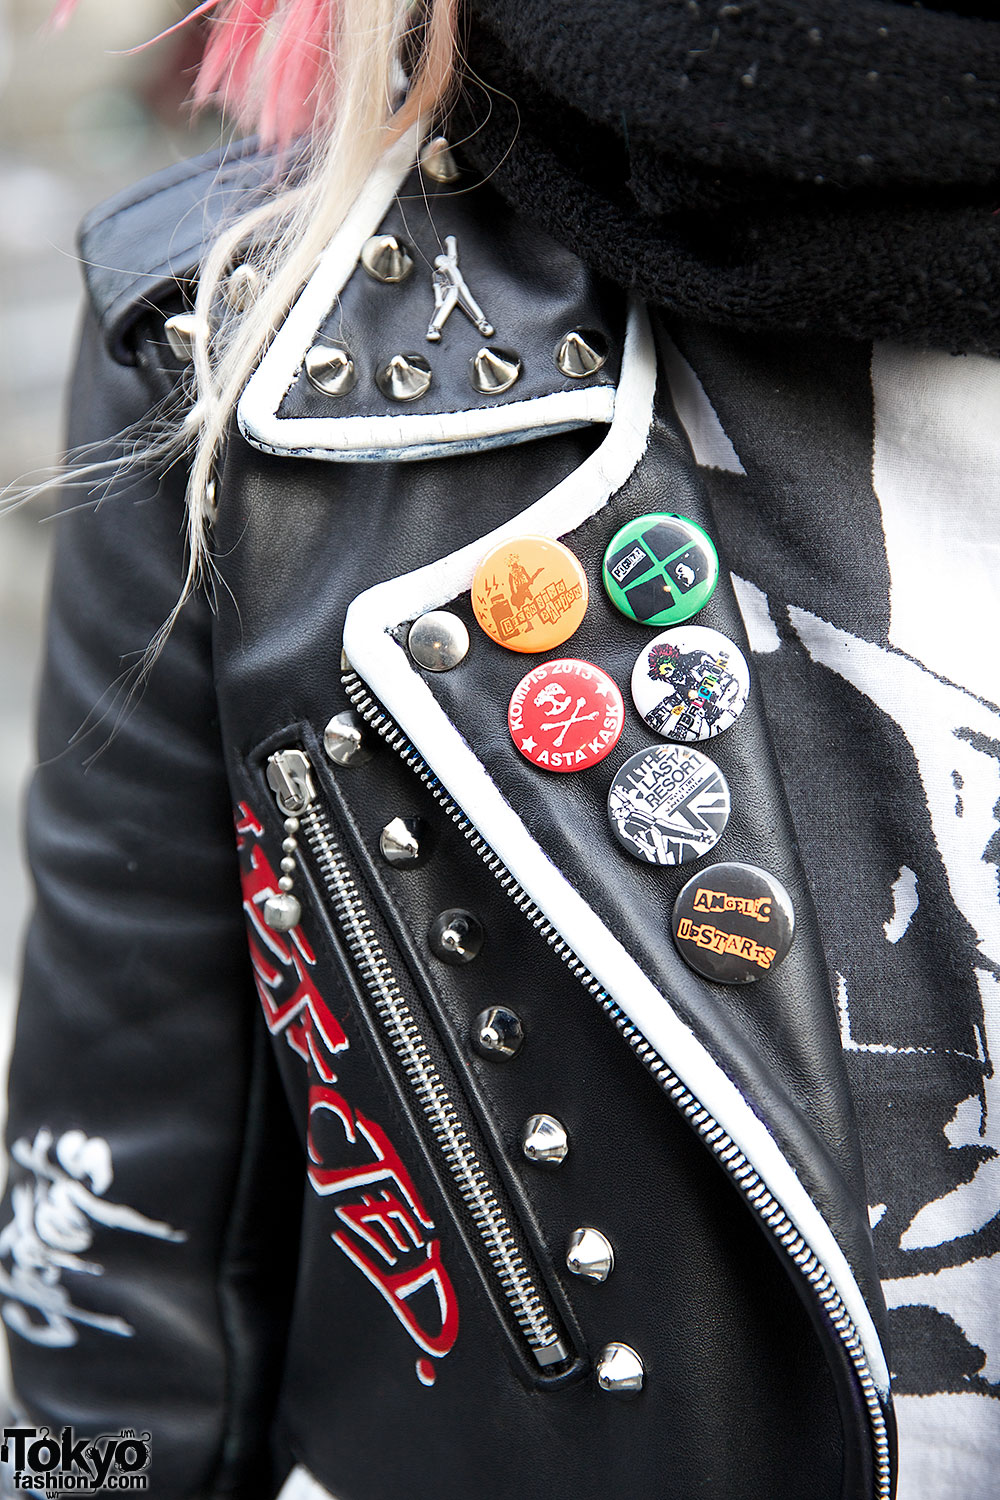 Harajuku Punks W Crosshawk And Mohawk Studded Leather And Boots Tokyo